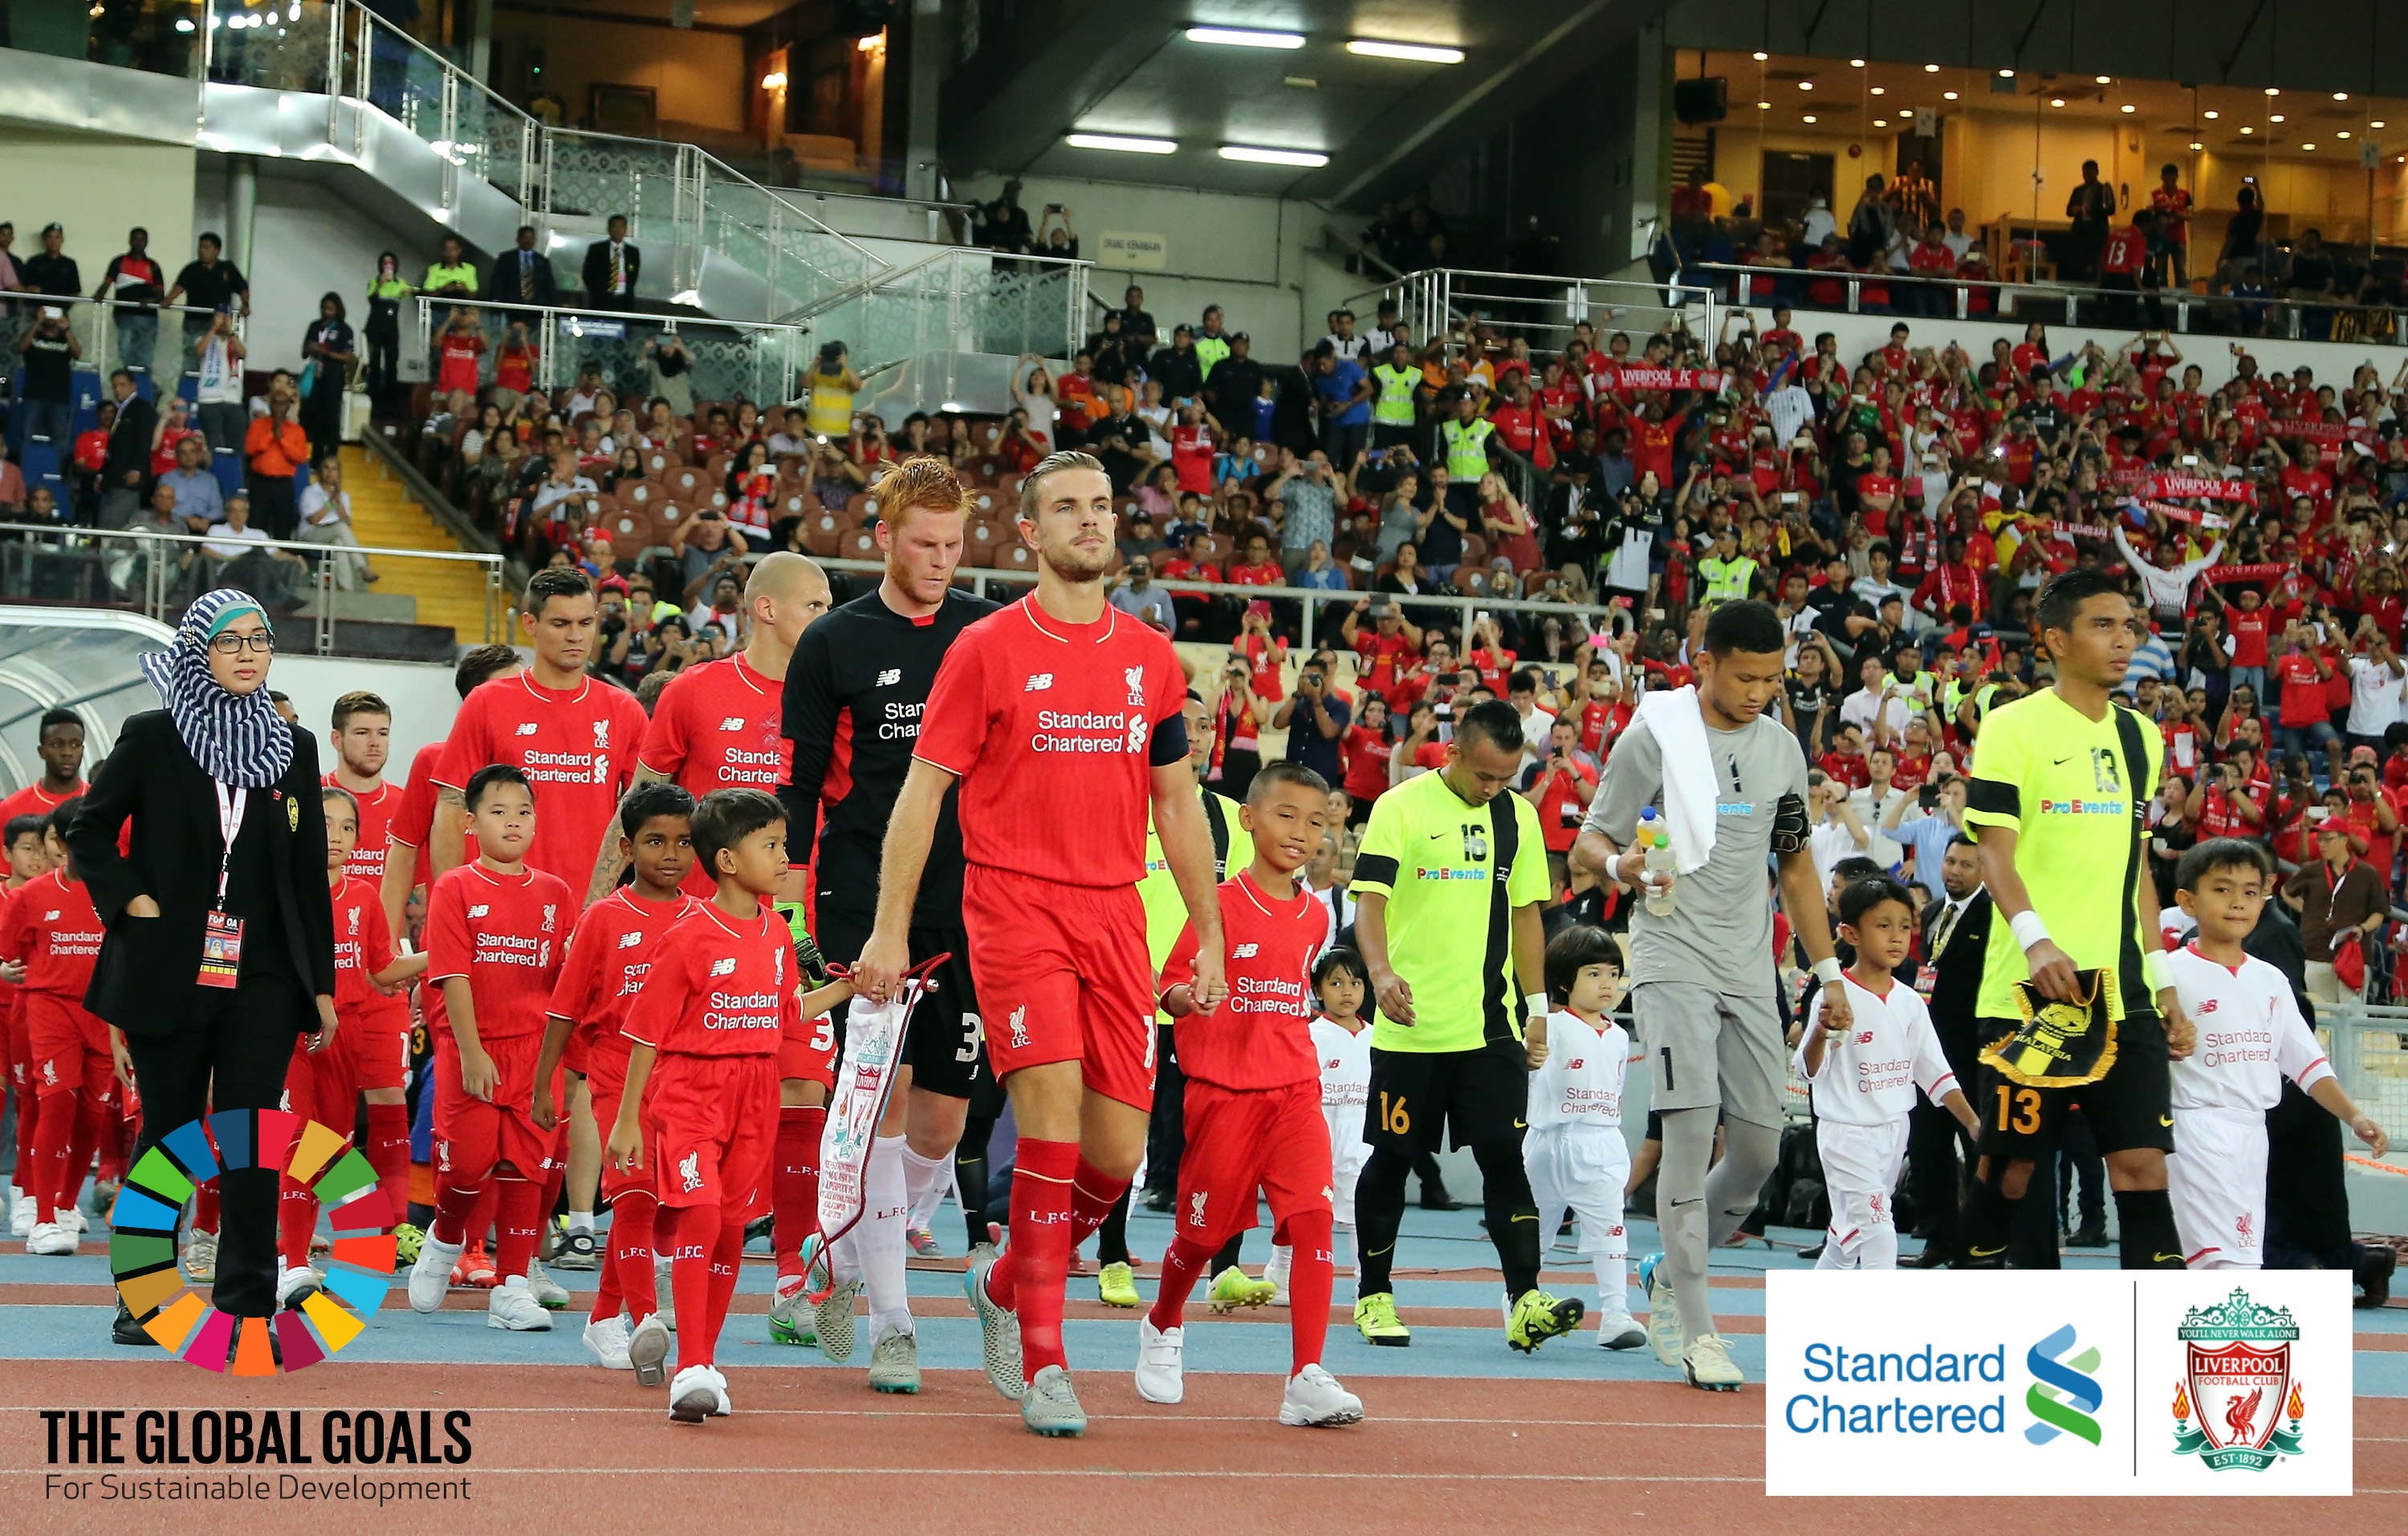 KUALA LUMPUR, MALAYSIA - JULY 24: (THE SUN OUT, THE SUN ON SUNDAY OUT) Liverpool and Malaysia XI enter the fileld prior to kick off of the international friendly match between Malaysia XI and Liverpool FC at Bukit Jalil National Stadium on July 24, 2015 in Kuala Lumpur, Malaysia. (Photo by Stanley Chou/LFC/Liverpool FC via Getty Images)